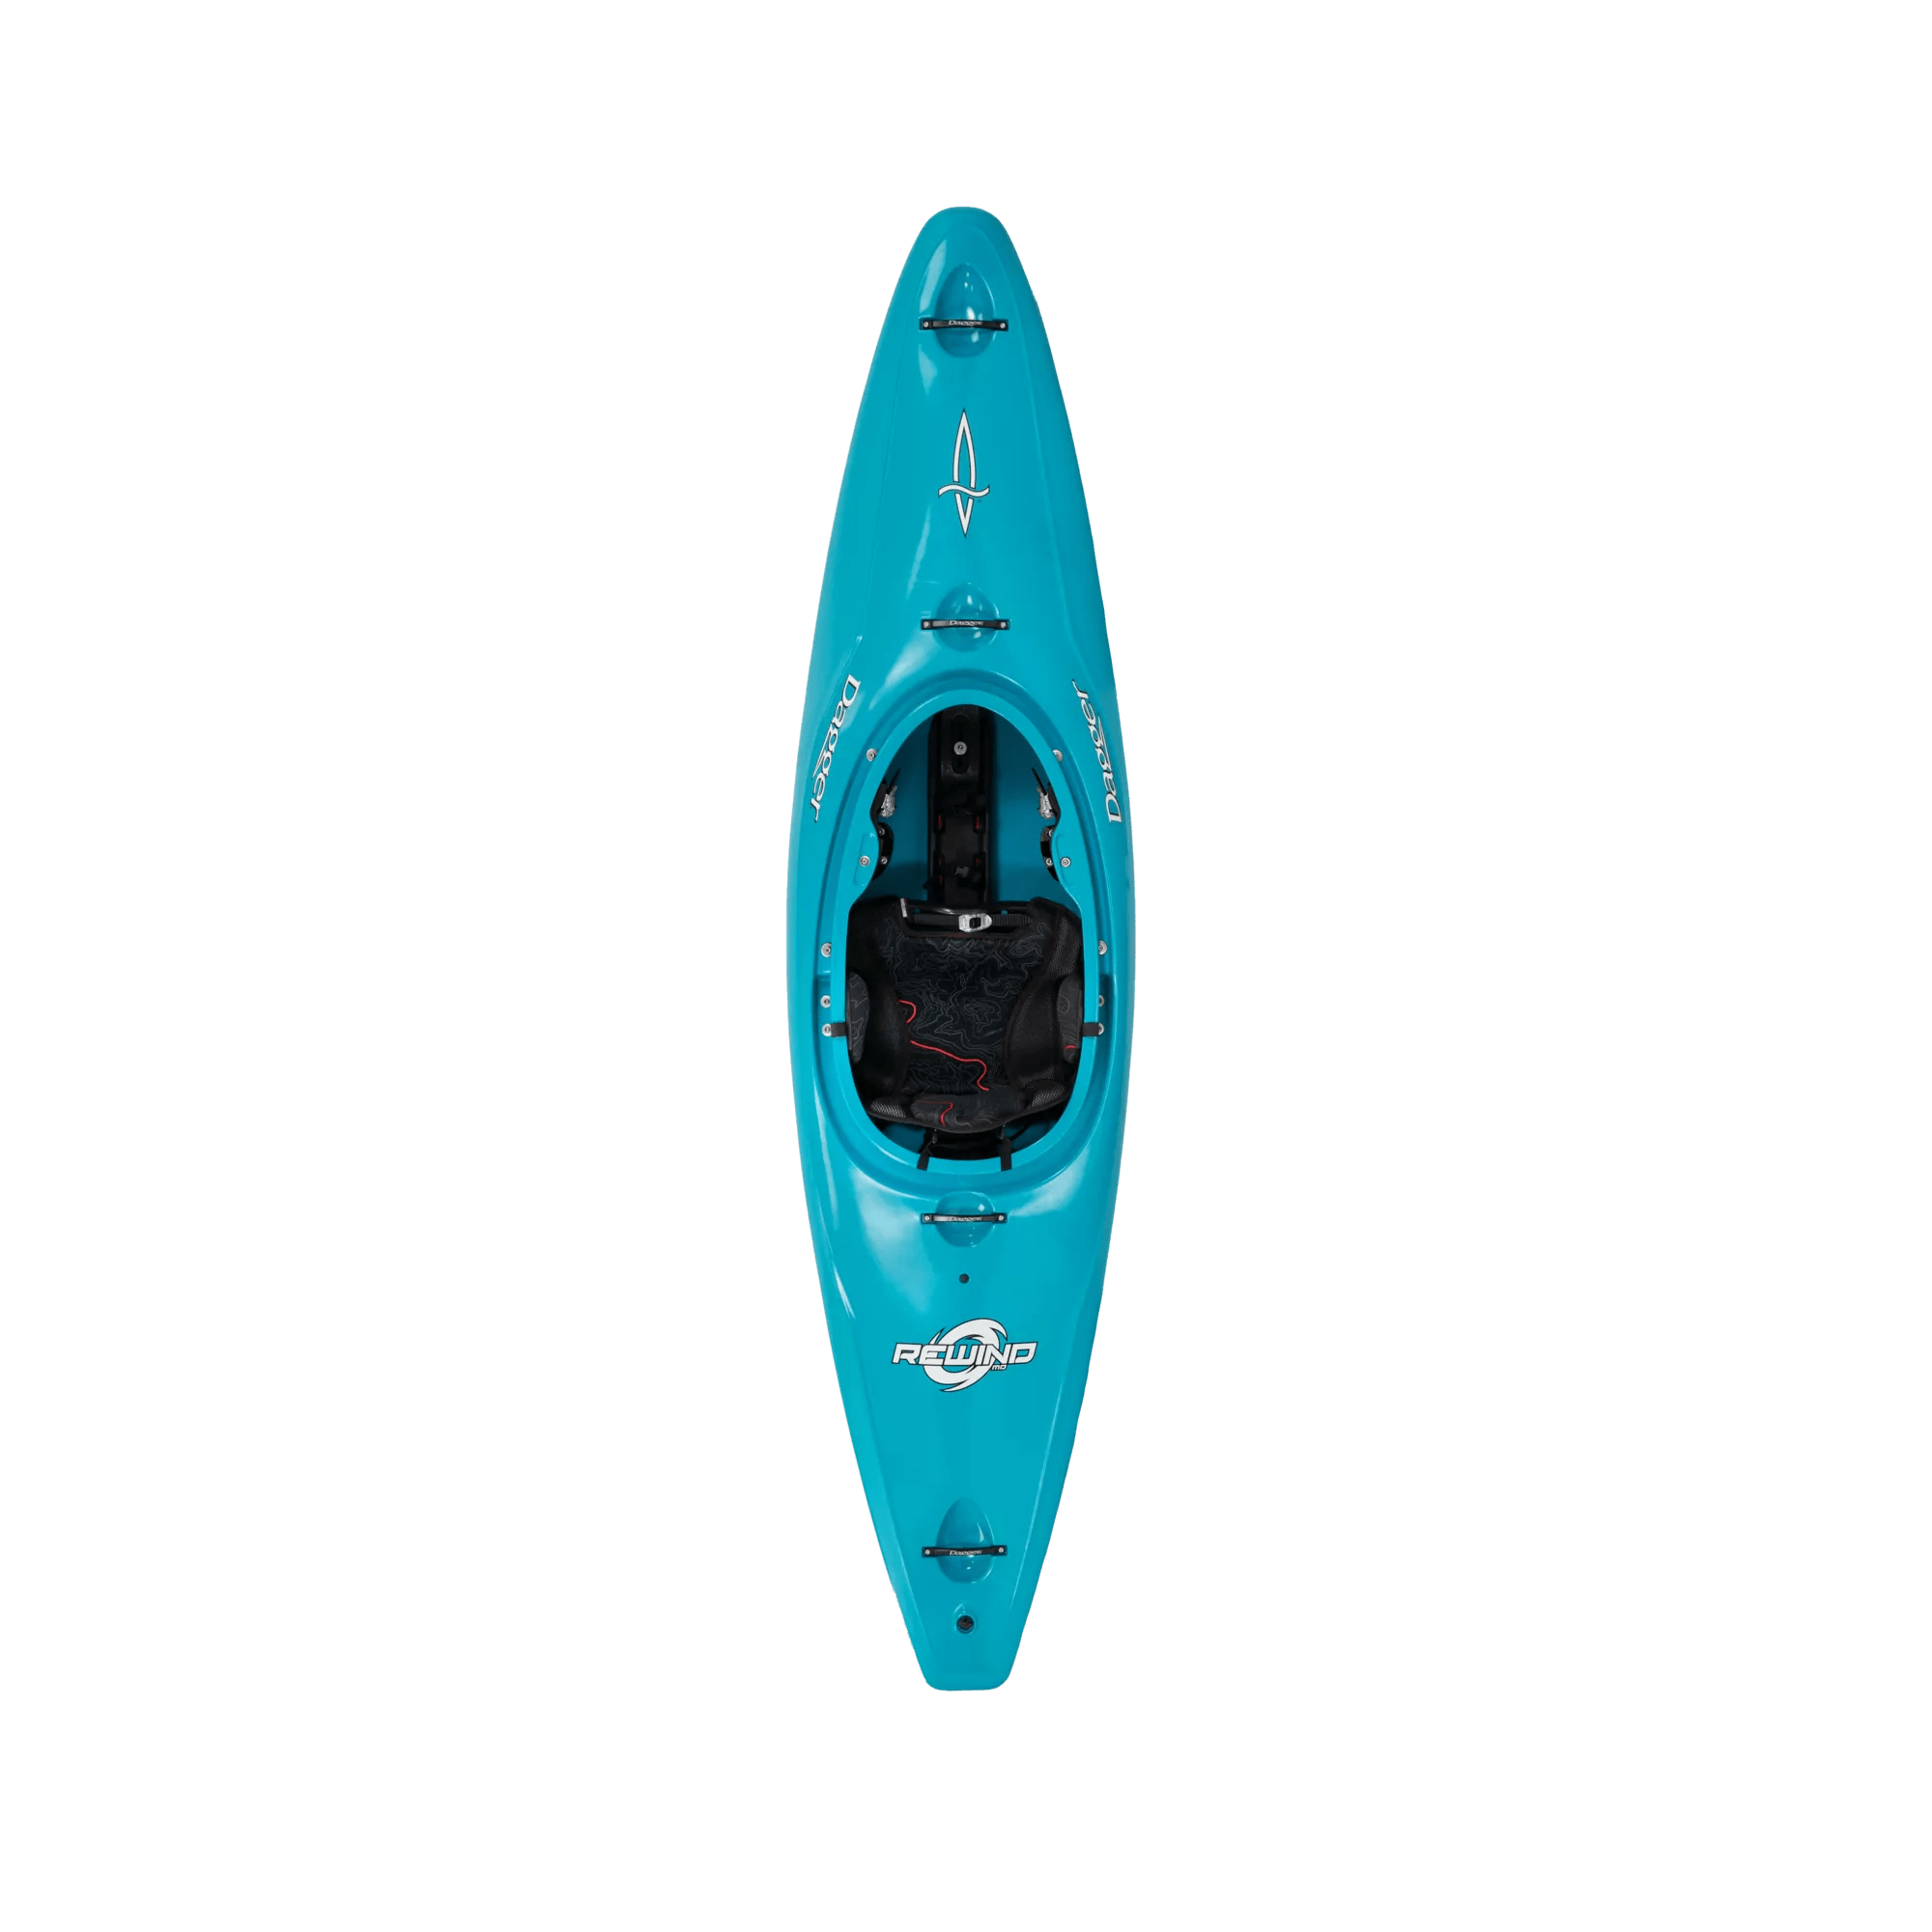 DAGGER - Rewind L River Play Whitewater Kayak - Blue - 9010484091 - TOP